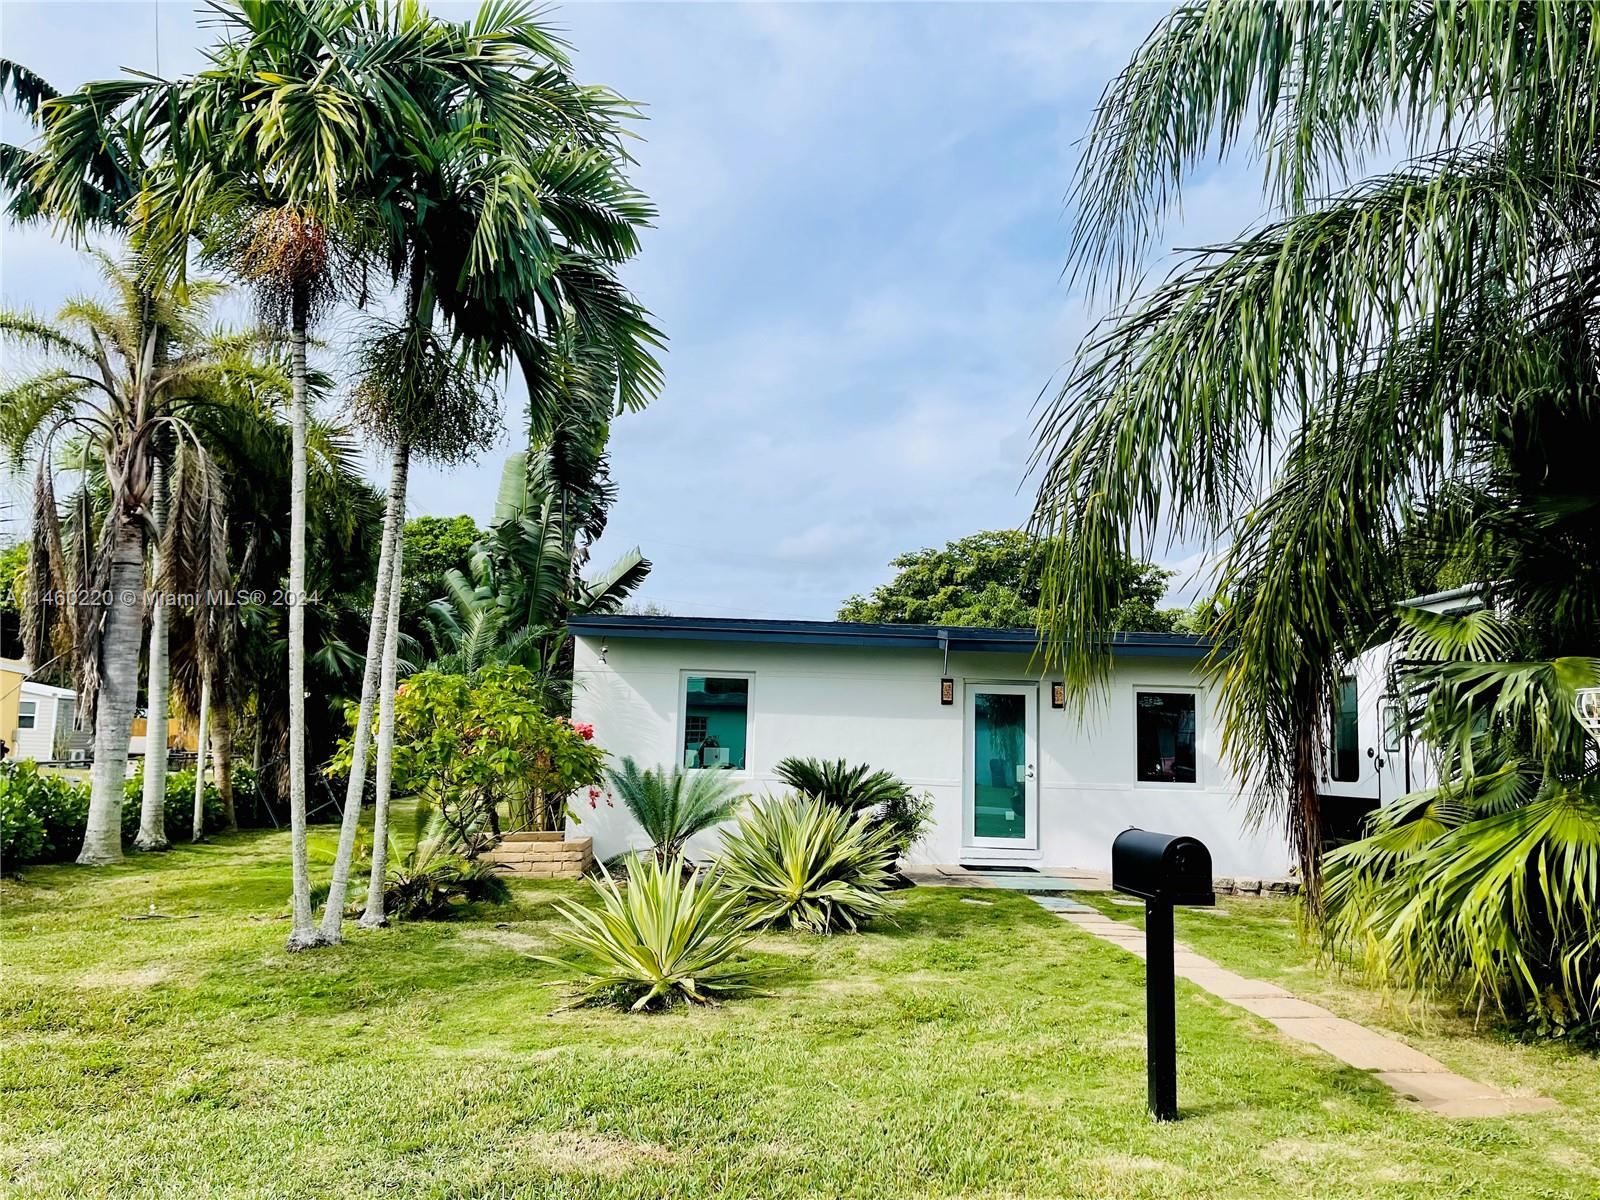 House for Rent in South Miami, FL